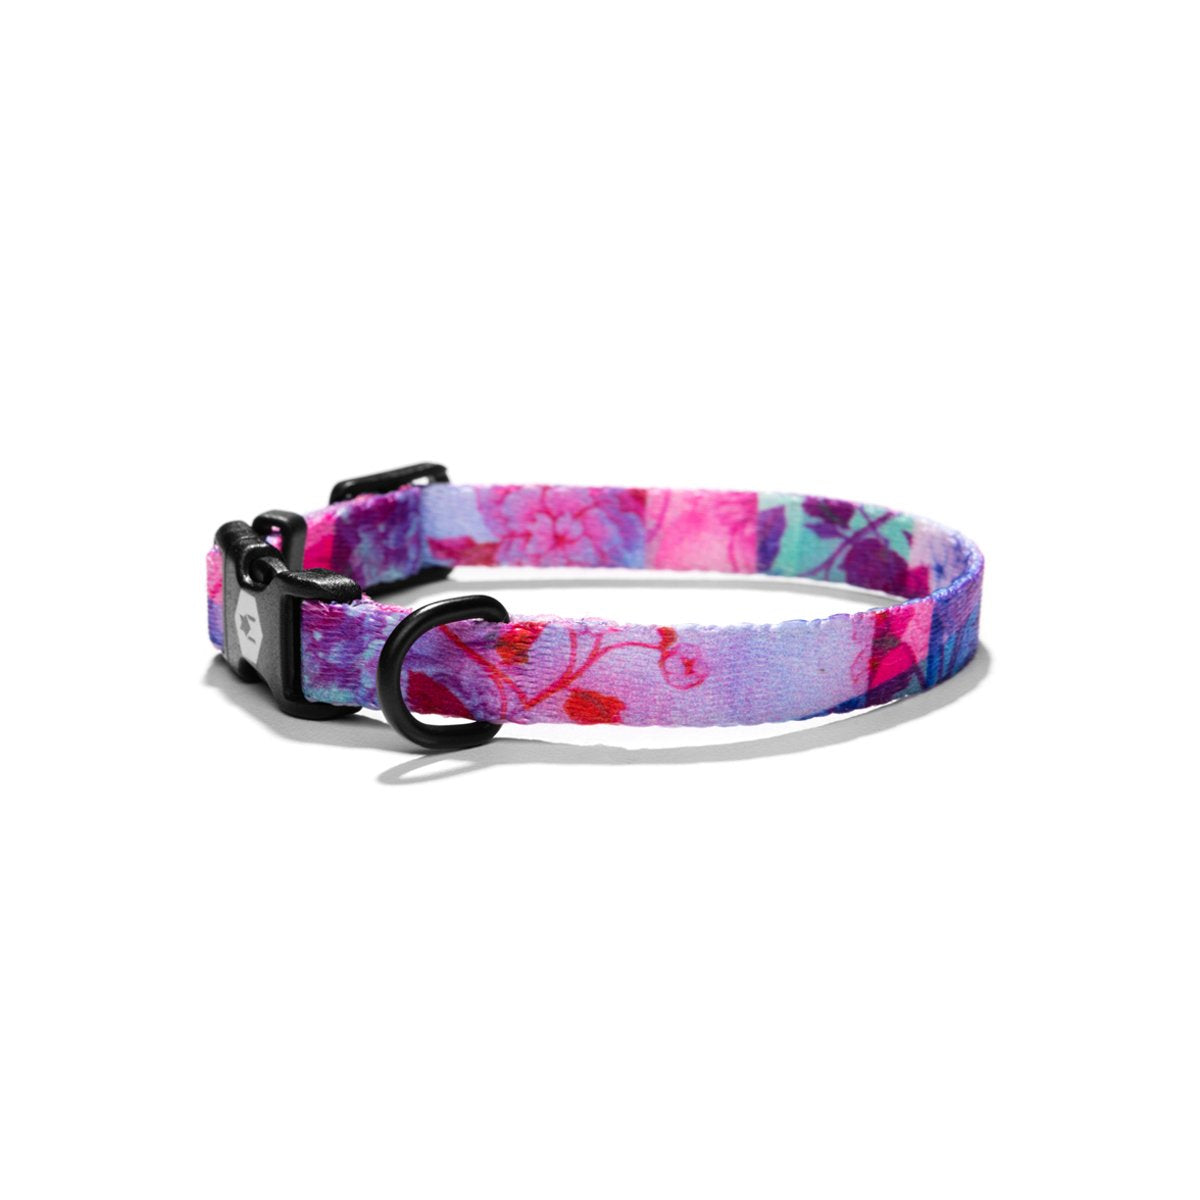 DayDream DOG COLLAR Made in the USA by Wolfgang Man & Beast